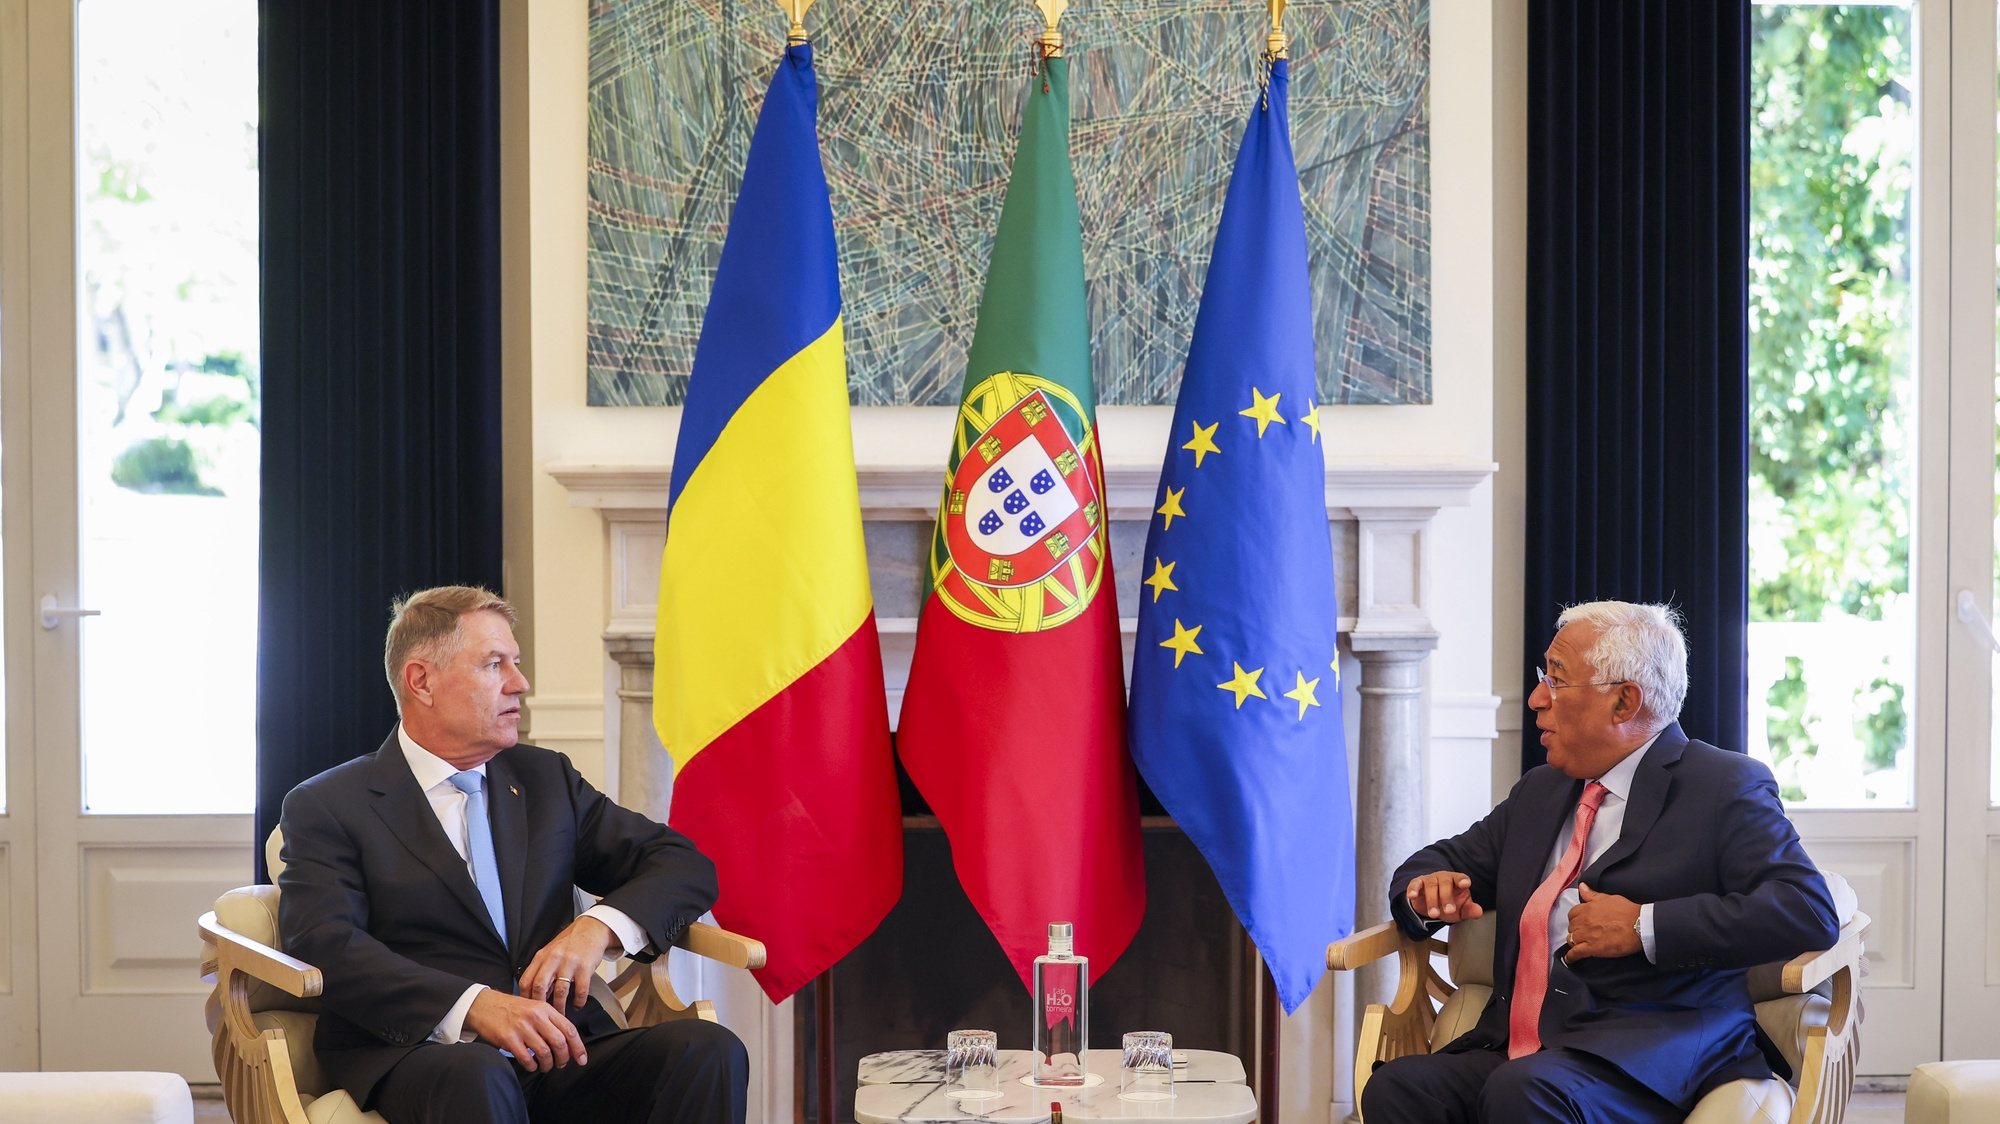 The Prime Minister of Portugal, Antonio Costa (R) with Romania President Klaus Iohannis (L) during a meeting at Sao Bento Palace, Lisbon, Portugal 09 October 2023. The President of Romania is making a state visit til October 9 and the agenda includes talks on increased cooperation in the field of defence and further political-diplomatic and sectoral collaboration, with a focus on intensifying trade, investment and energy, digitalisation, health, education, and culture. JOSE SENA GOULAO/LUSA